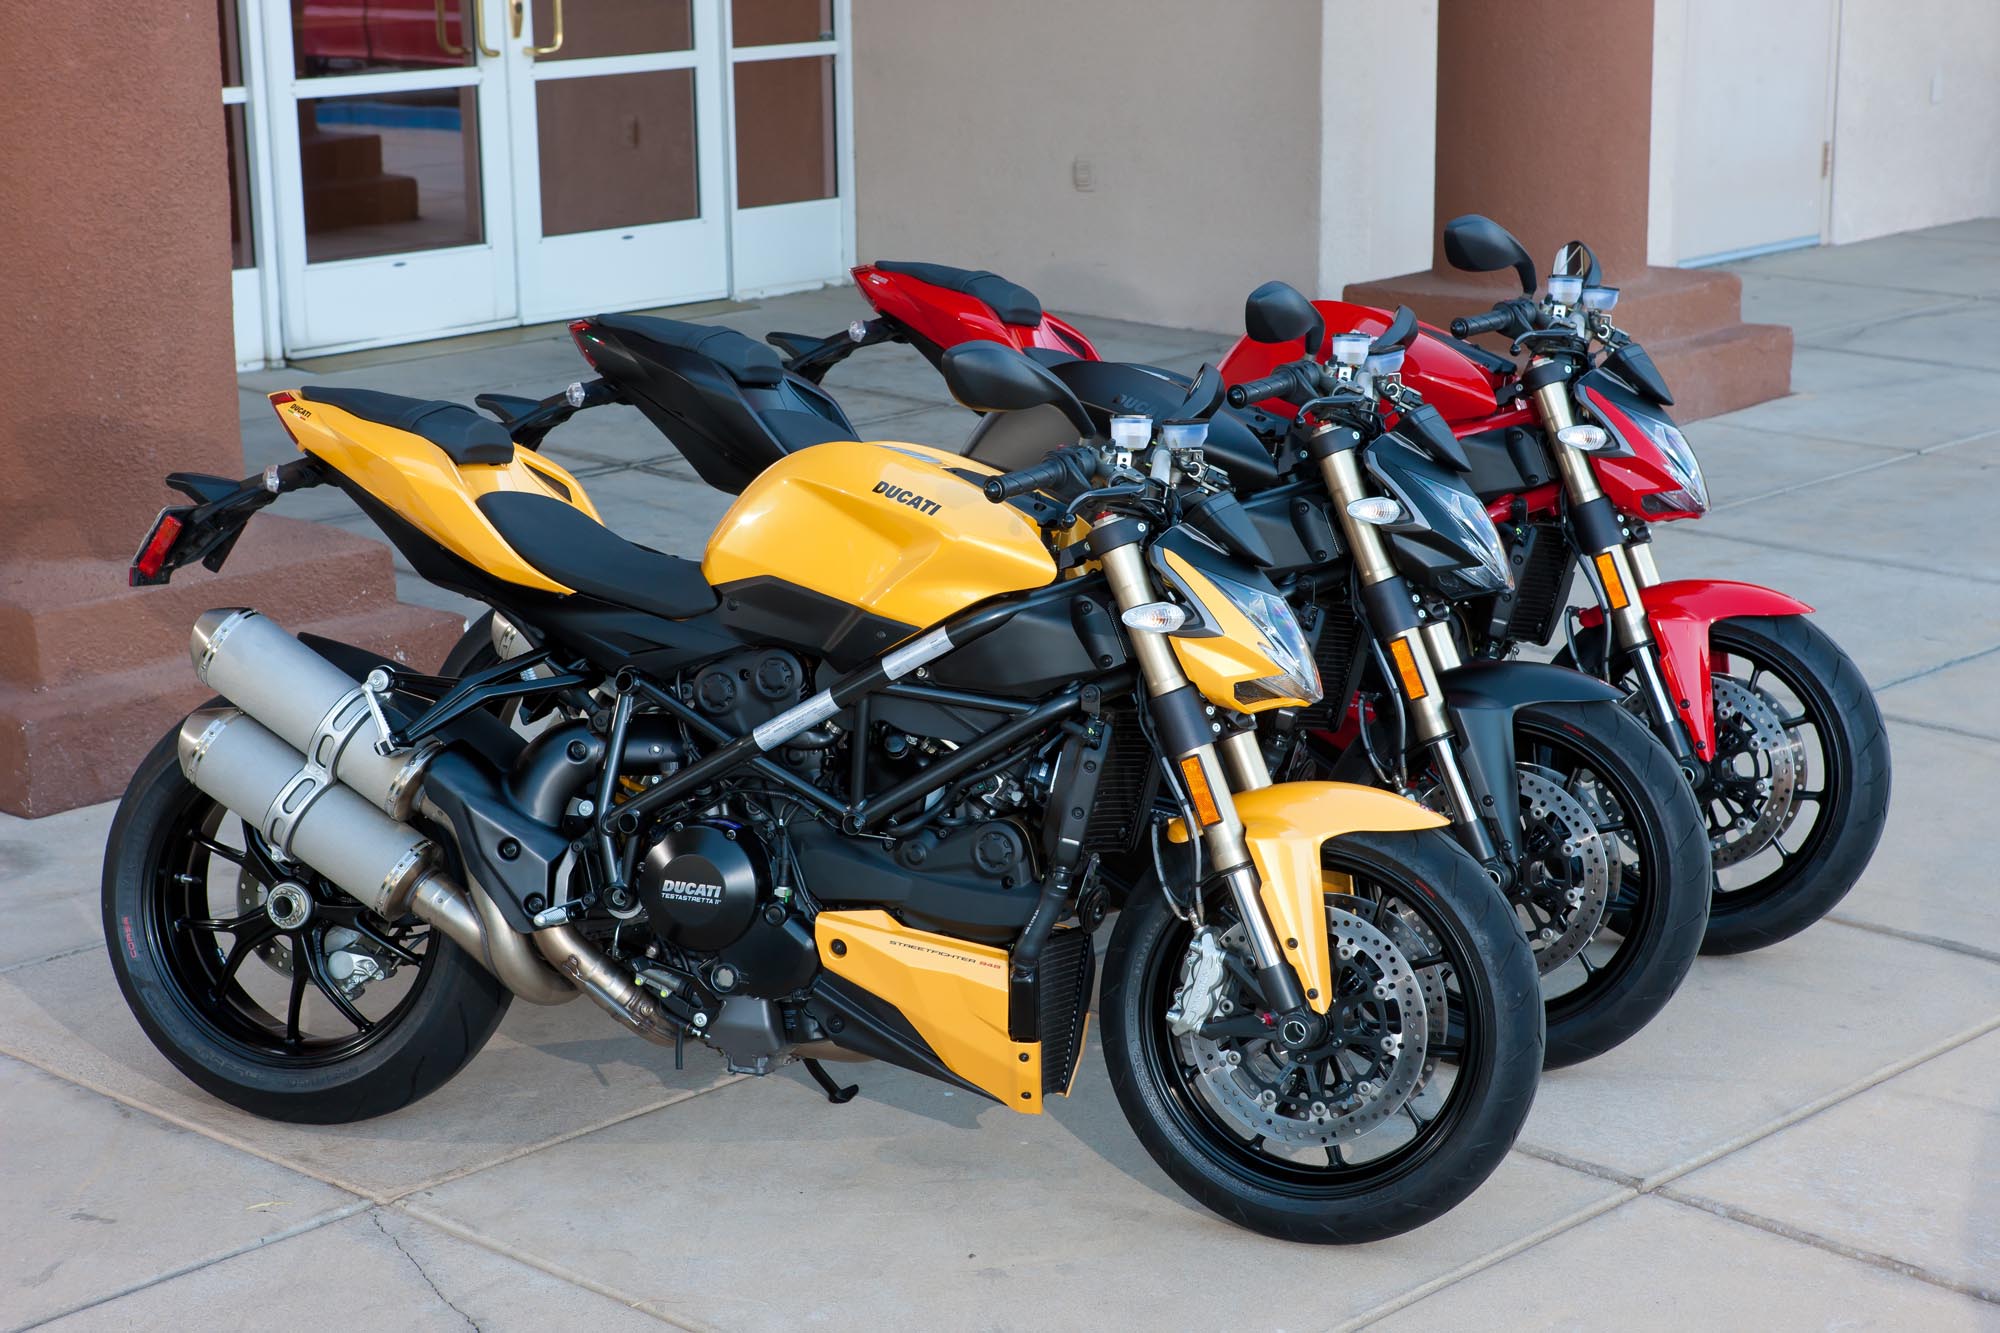 http://www.asphaltandrubber.com/wp-content/gallery/ducati-streetfighter-848-ride-review-in-the-palm-desert/ducati-streetfighter-848-palm-springs-test-static-06.jpg